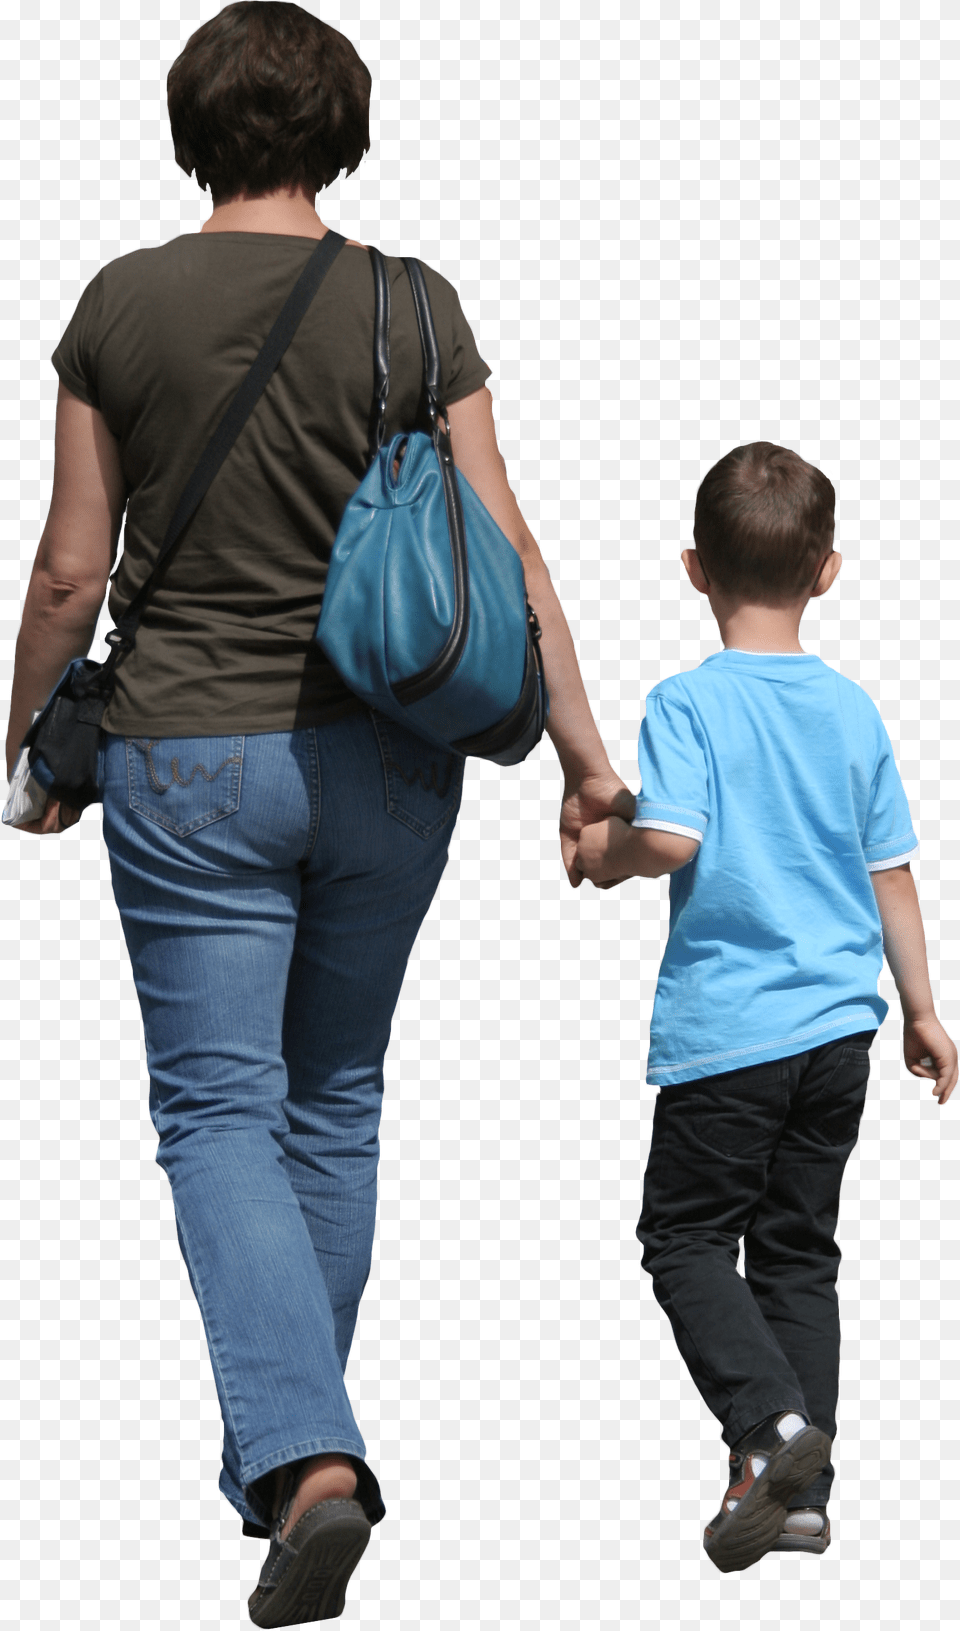 Cut Out Children And Mother, Accessories, Person, Pants, Jeans Png